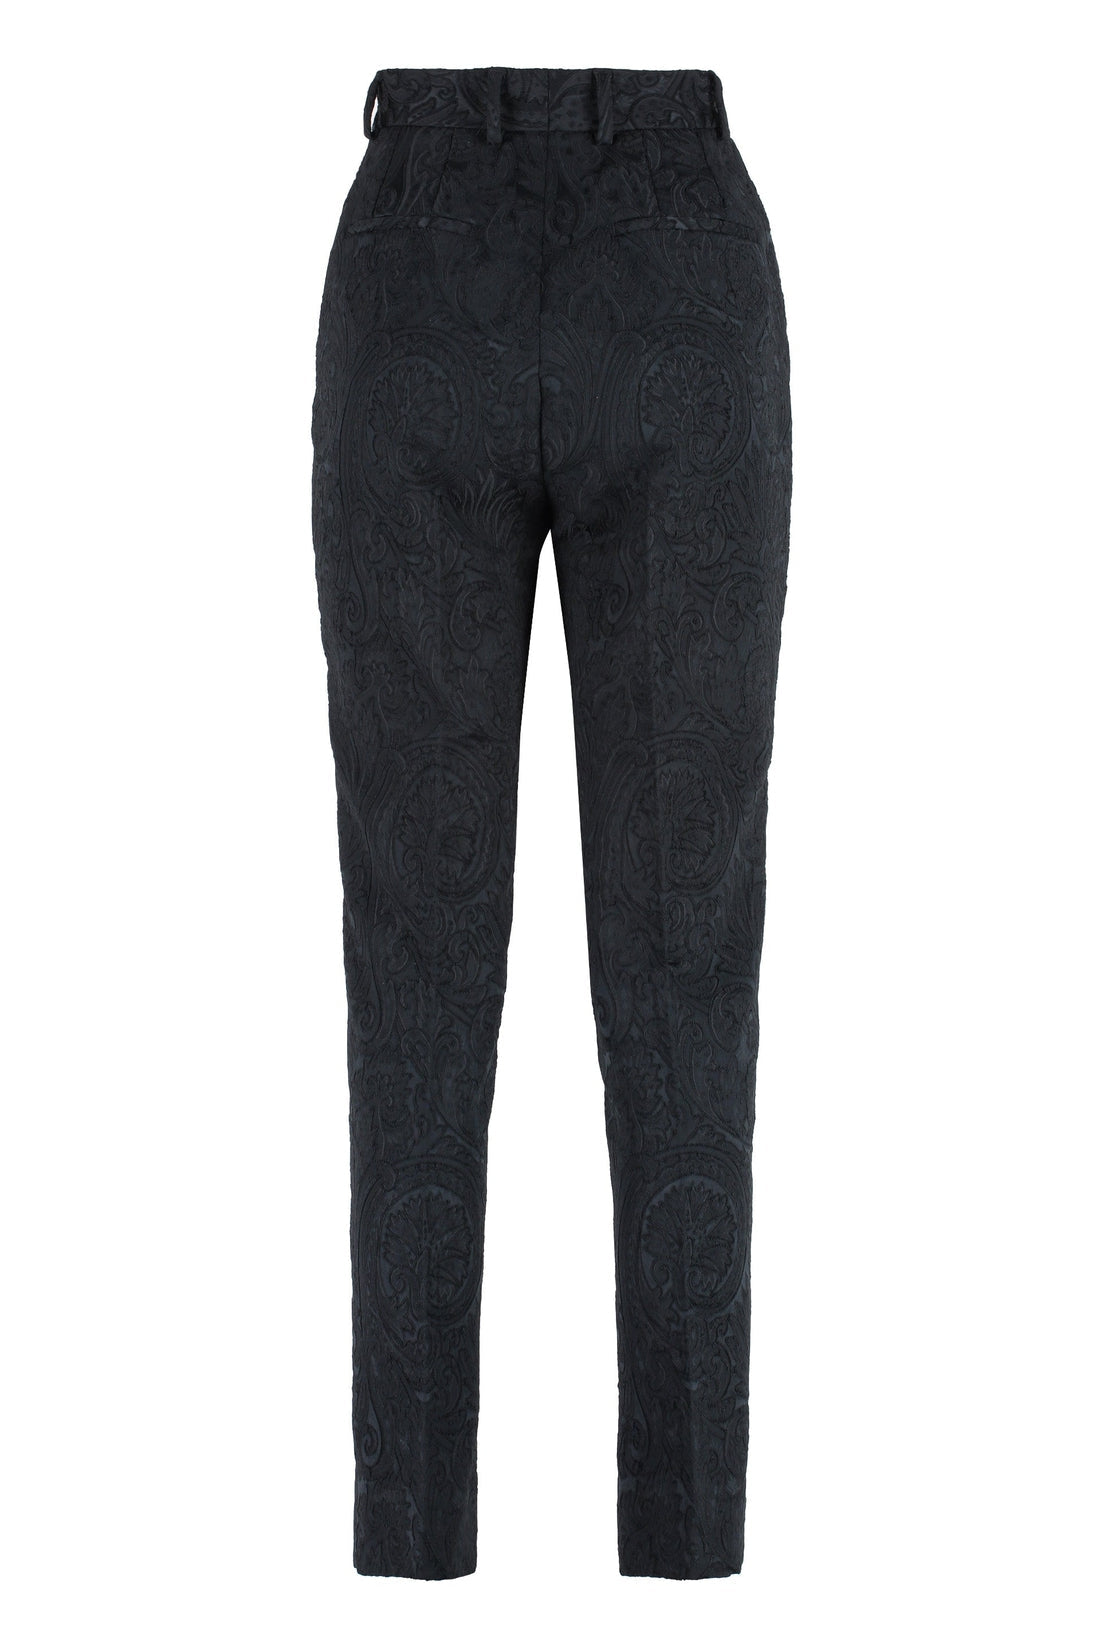 Dolce & Gabbana-OUTLET-SALE-High-rise trousers-ARCHIVIST